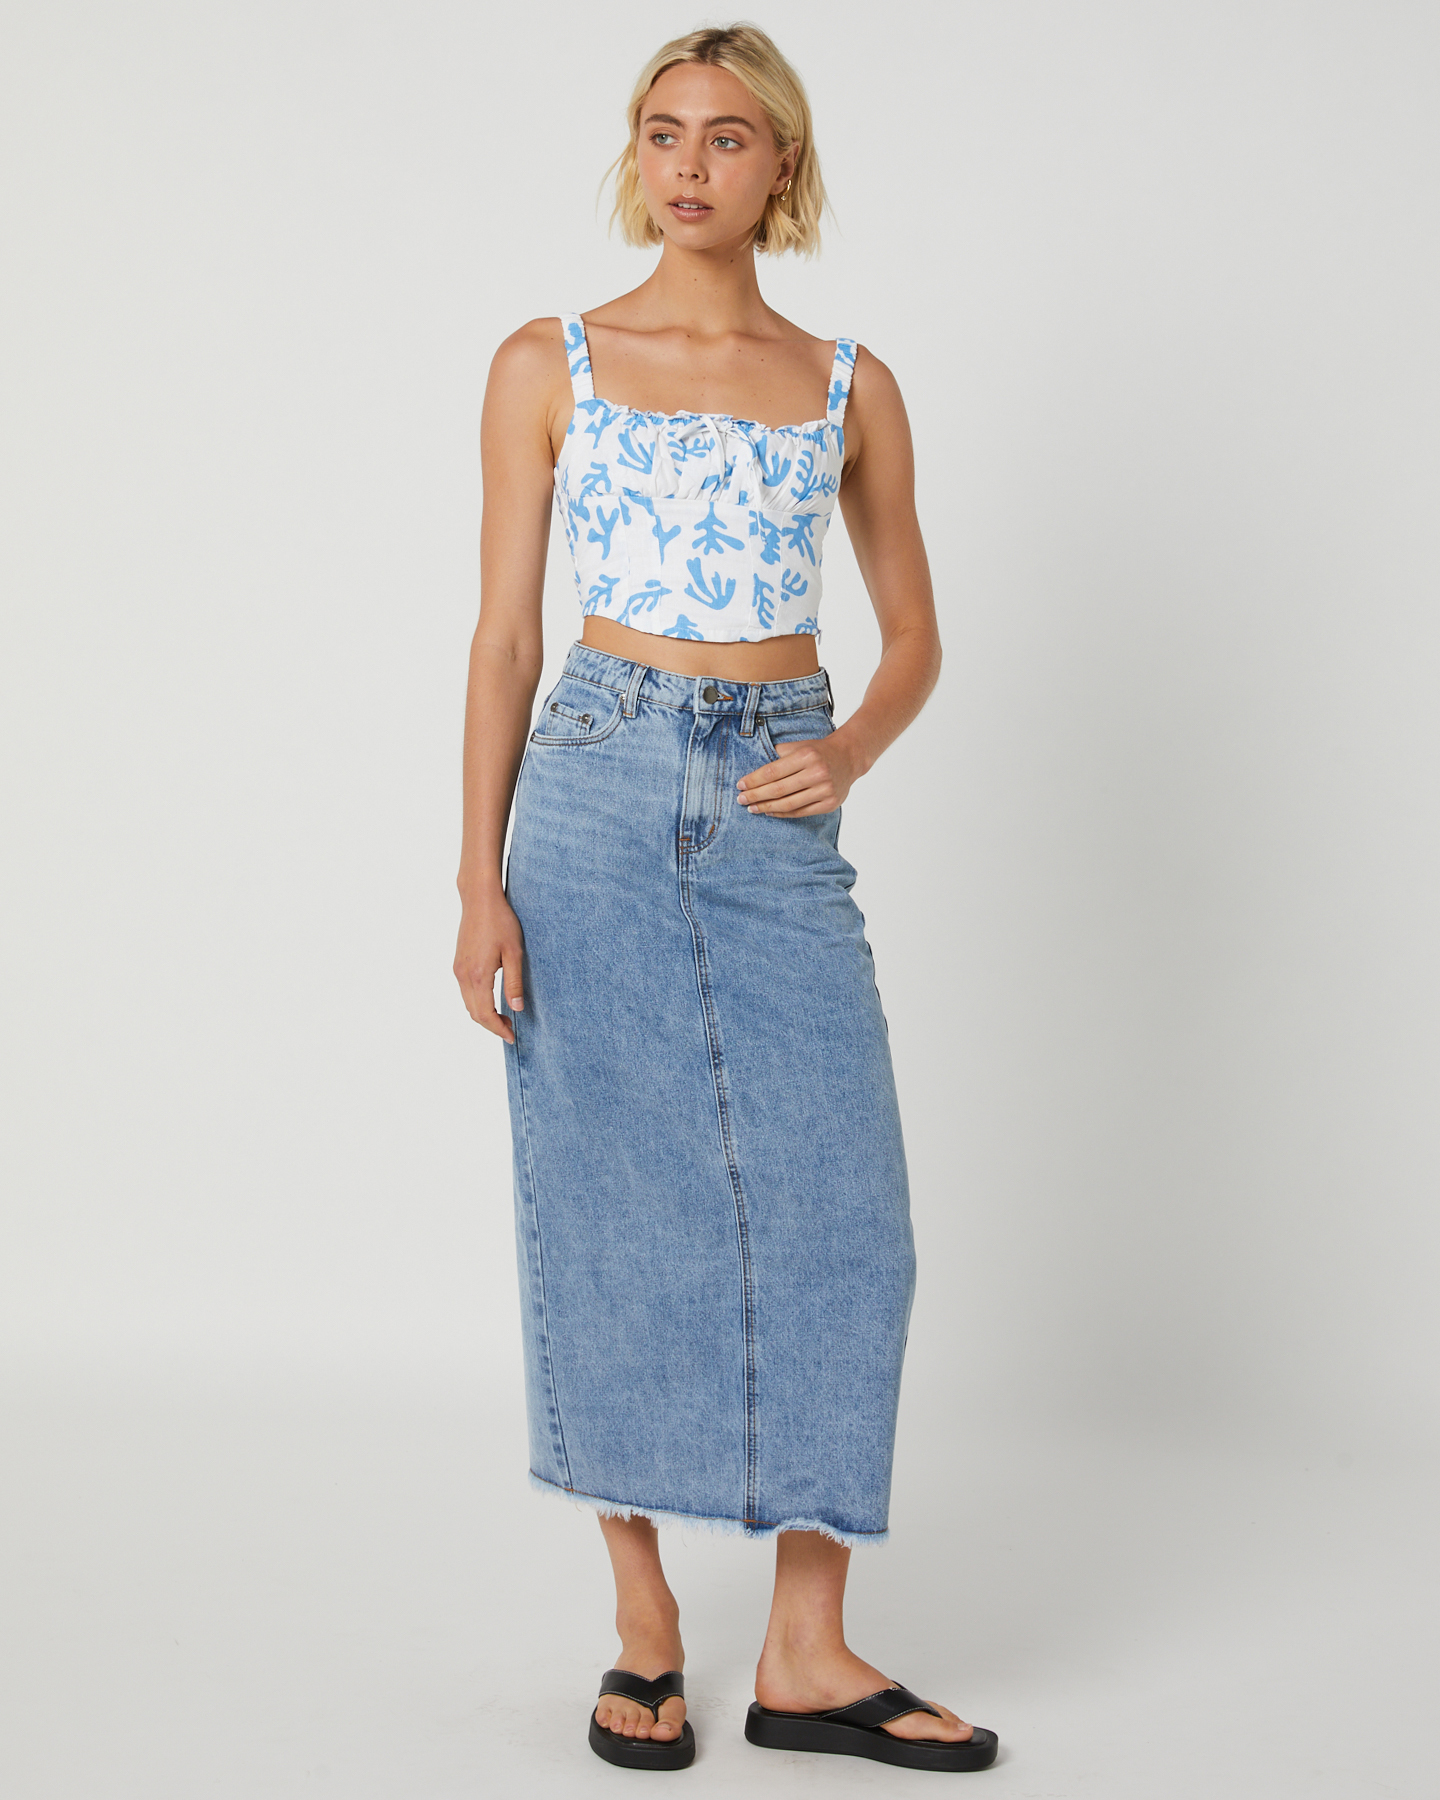 All About Eve Ray Maxi Skirt - Light Blue | SurfStitch